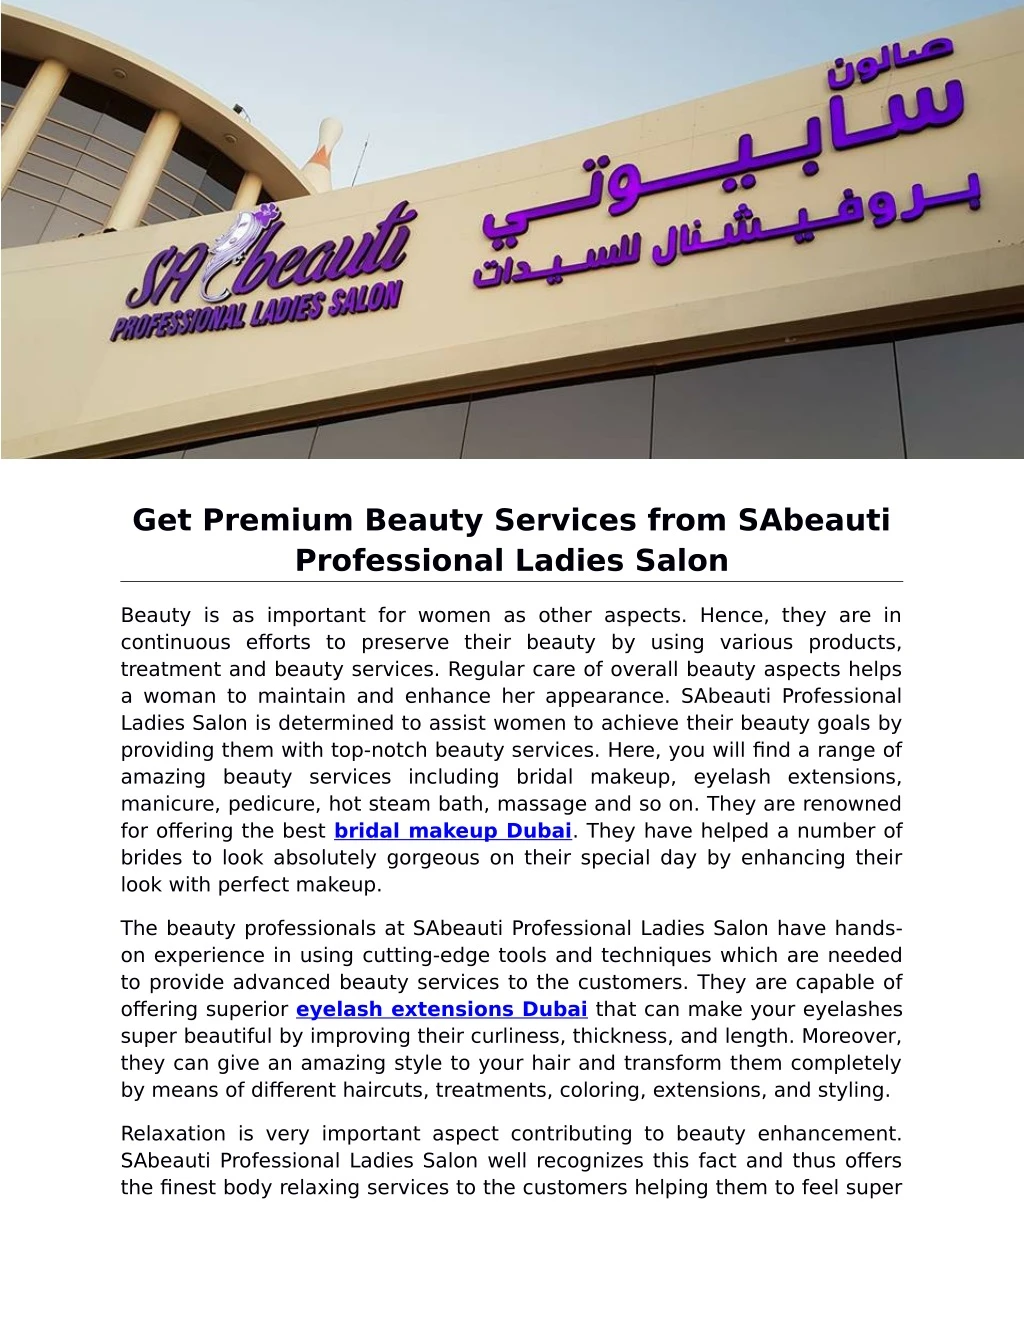 get premium beauty services from sabeauti